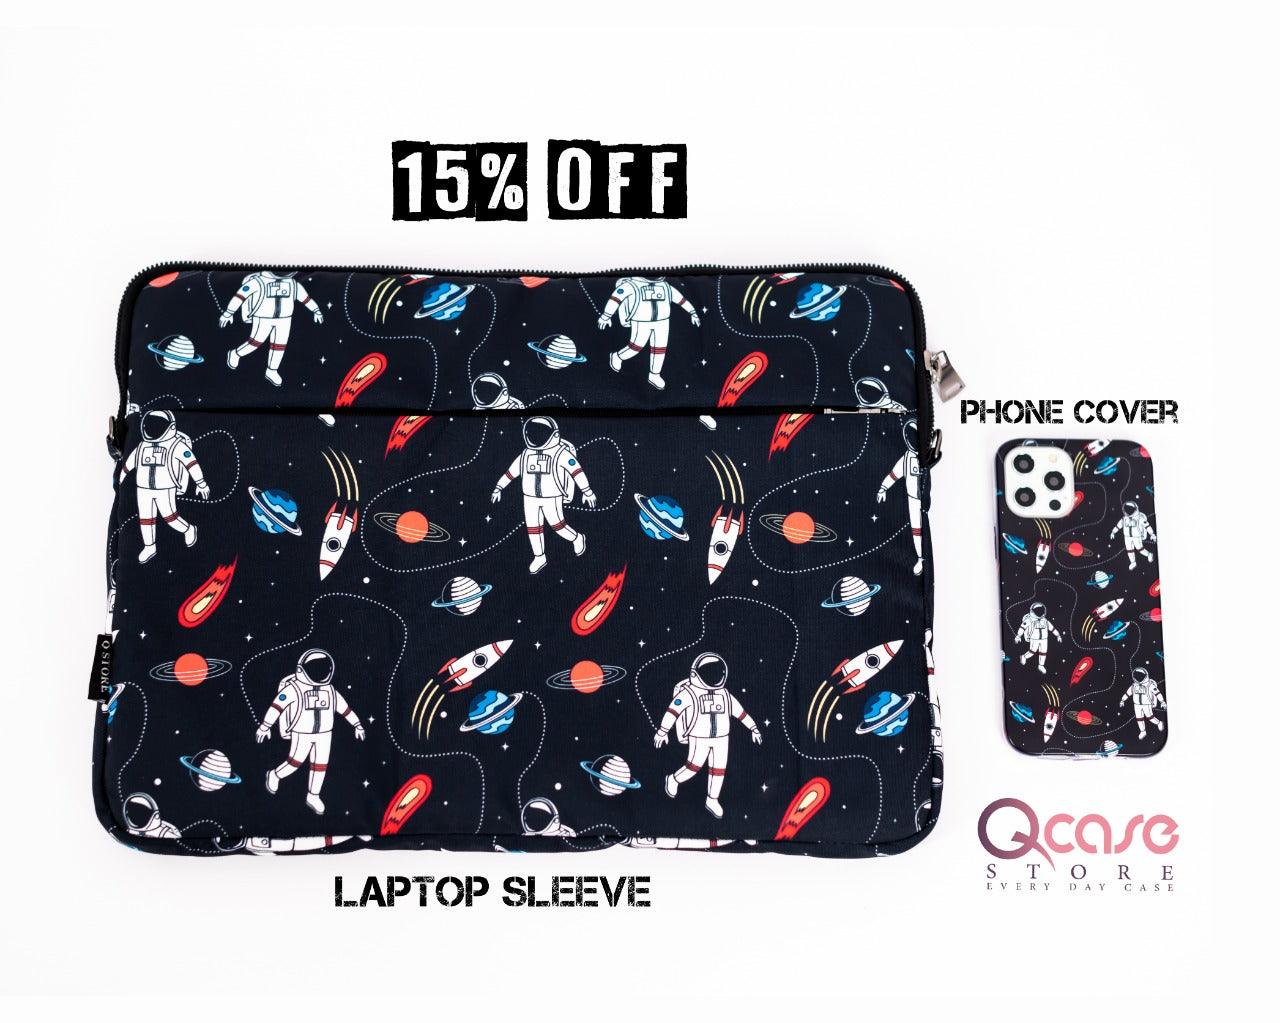 space laptop sleeve - Qcase Store | Everyday Case